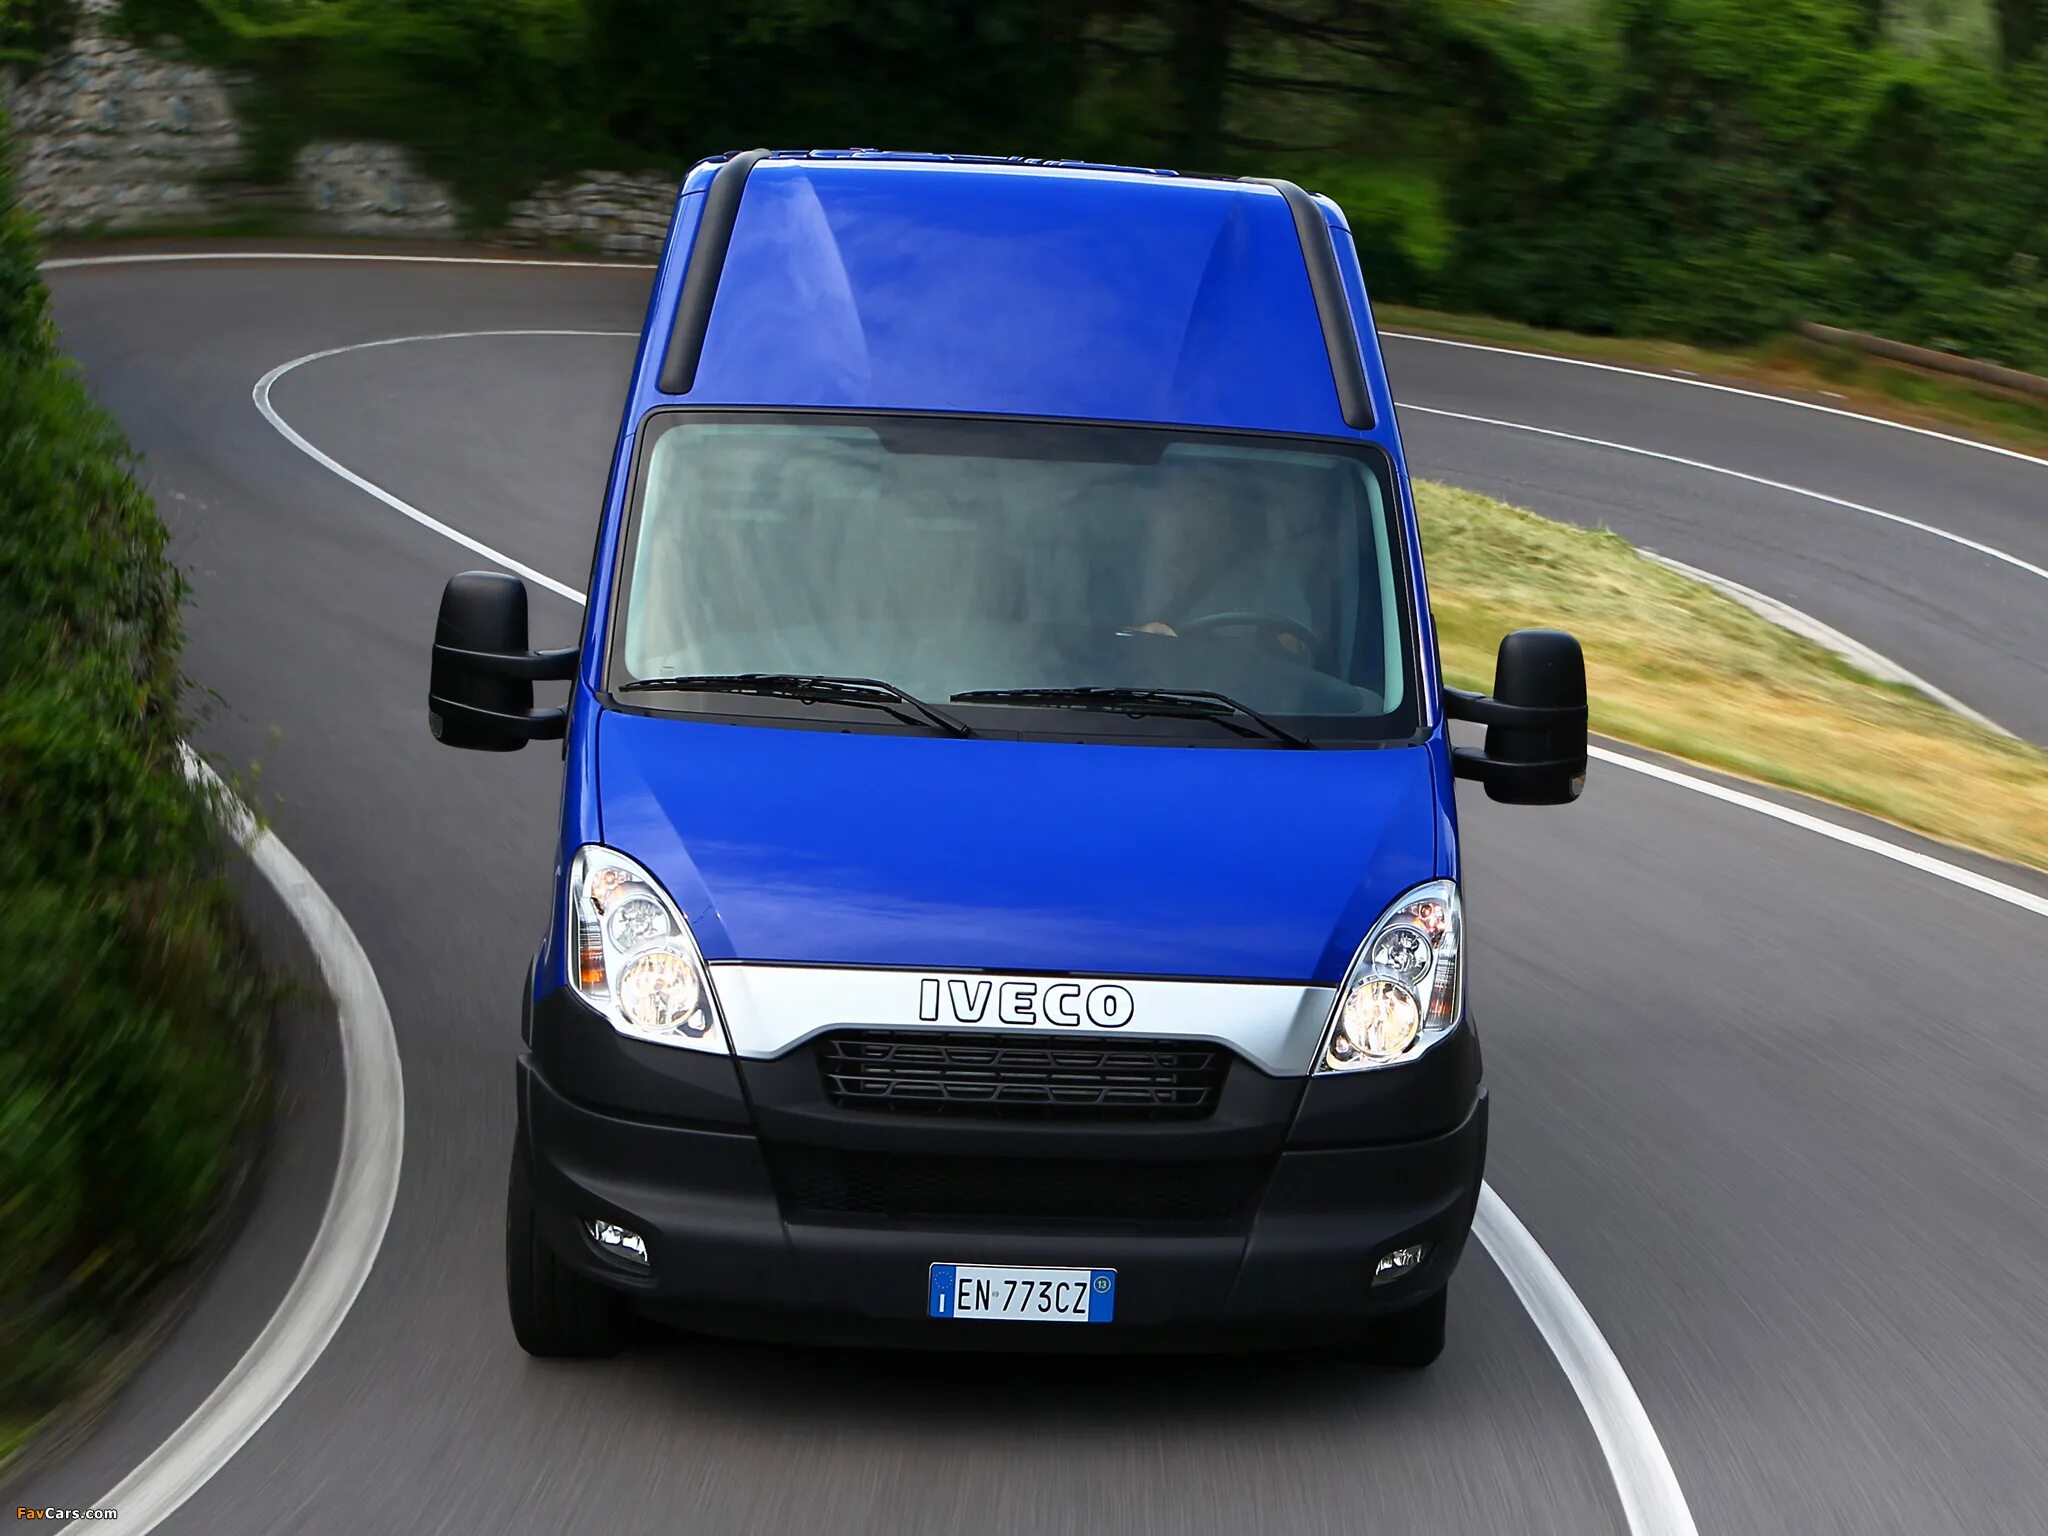 Iveco Daily. Iveco Daily 2011. Ивеко Дейли 2011. Ивеко Дейли 2011 года. Ивеко дейли фото